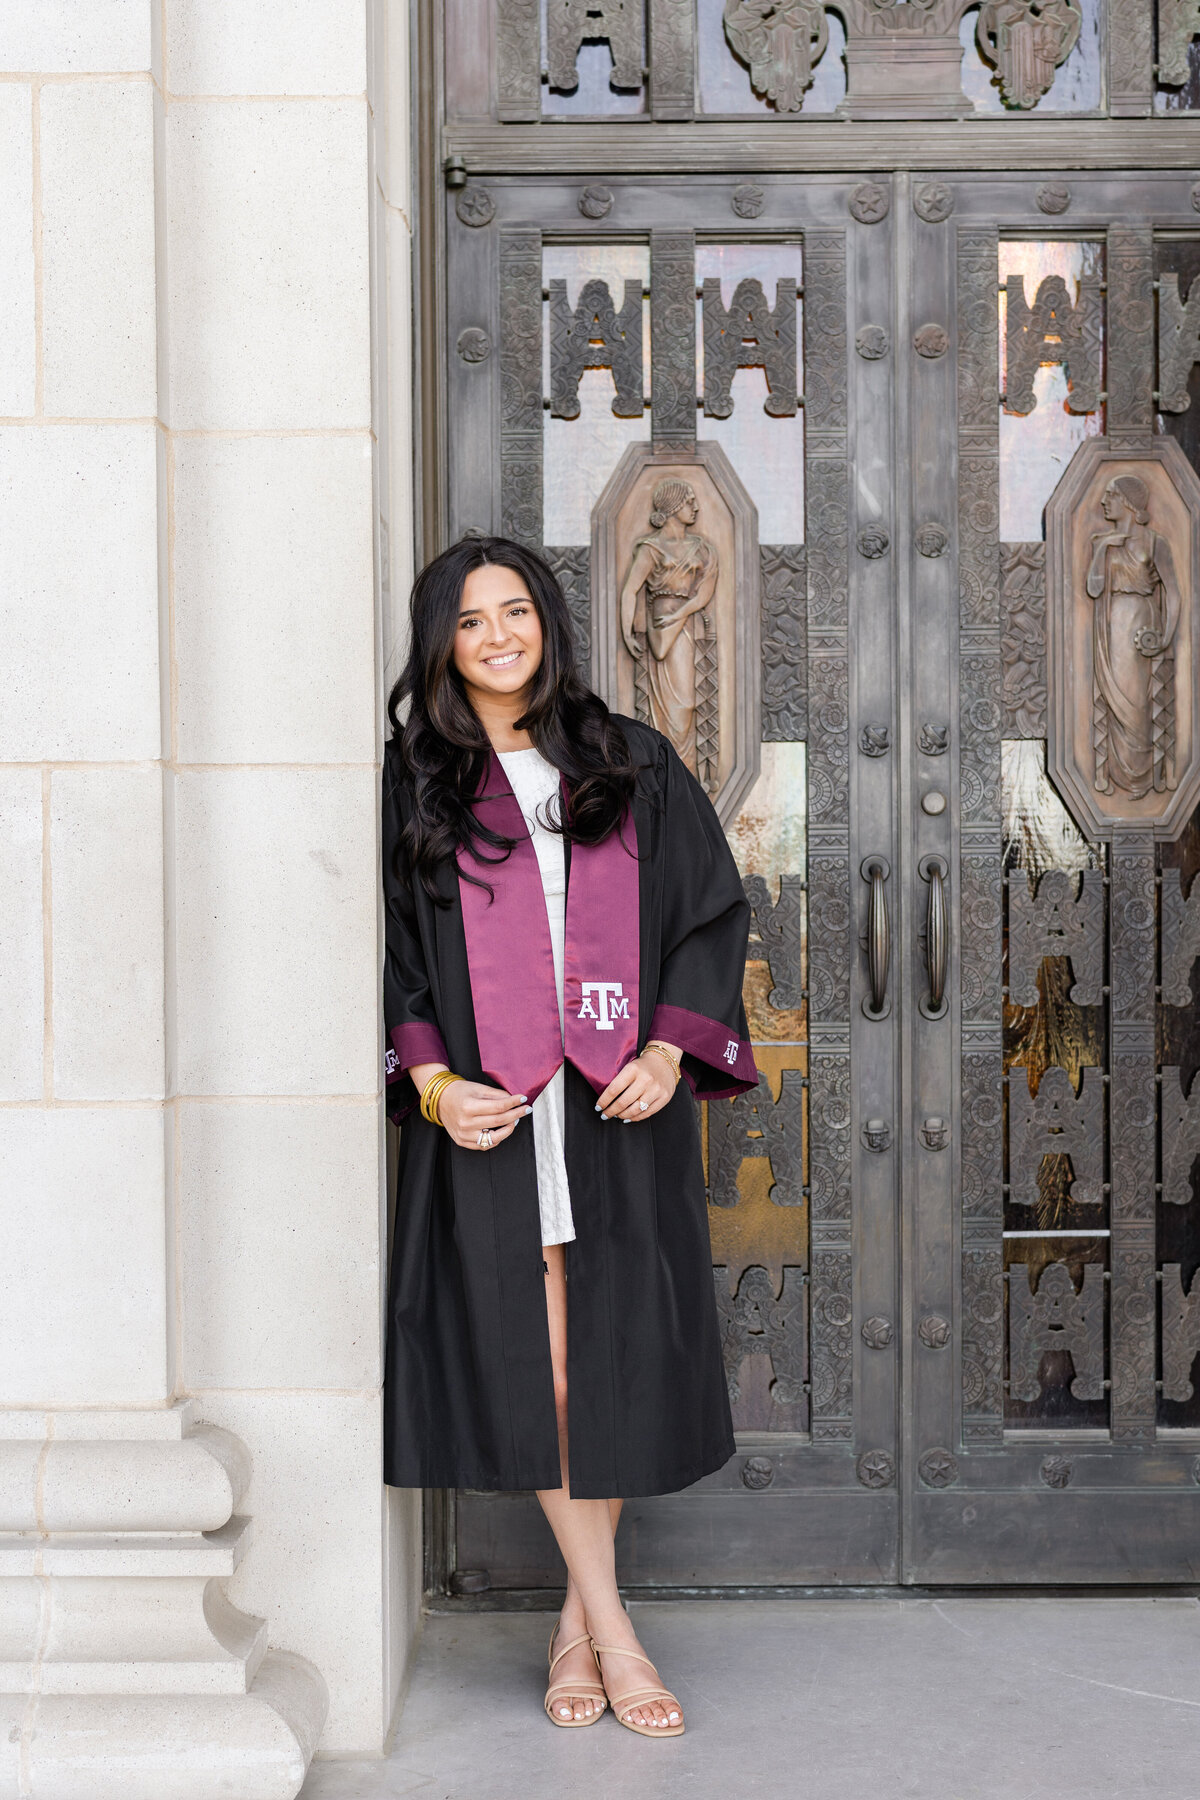 Texas A&M senior girl leaning against front door of Administration Building while smiling and holding maroon stole while wearing gown